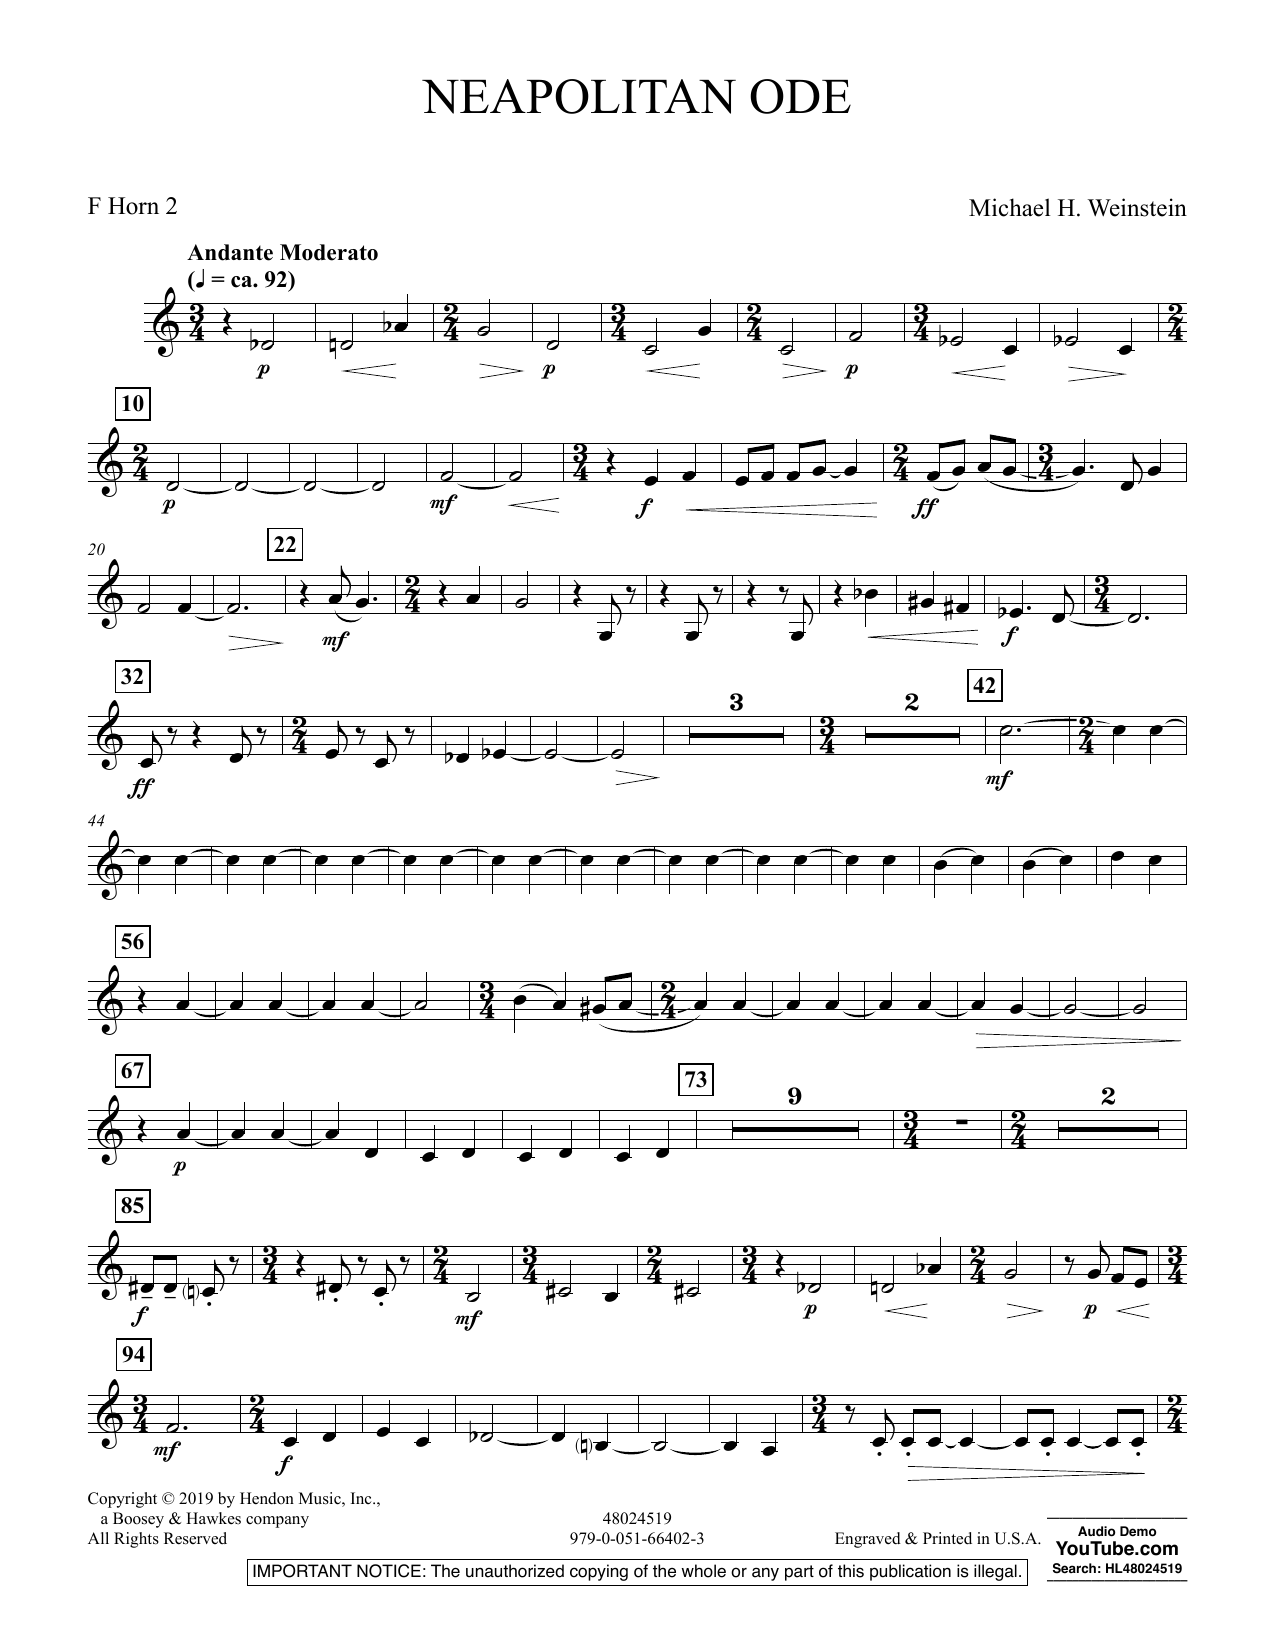 Michael H. Weinstein Neapolitan Ode - F Horn 2 sheet music preview music notes and score for Concert Band including 2 page(s)